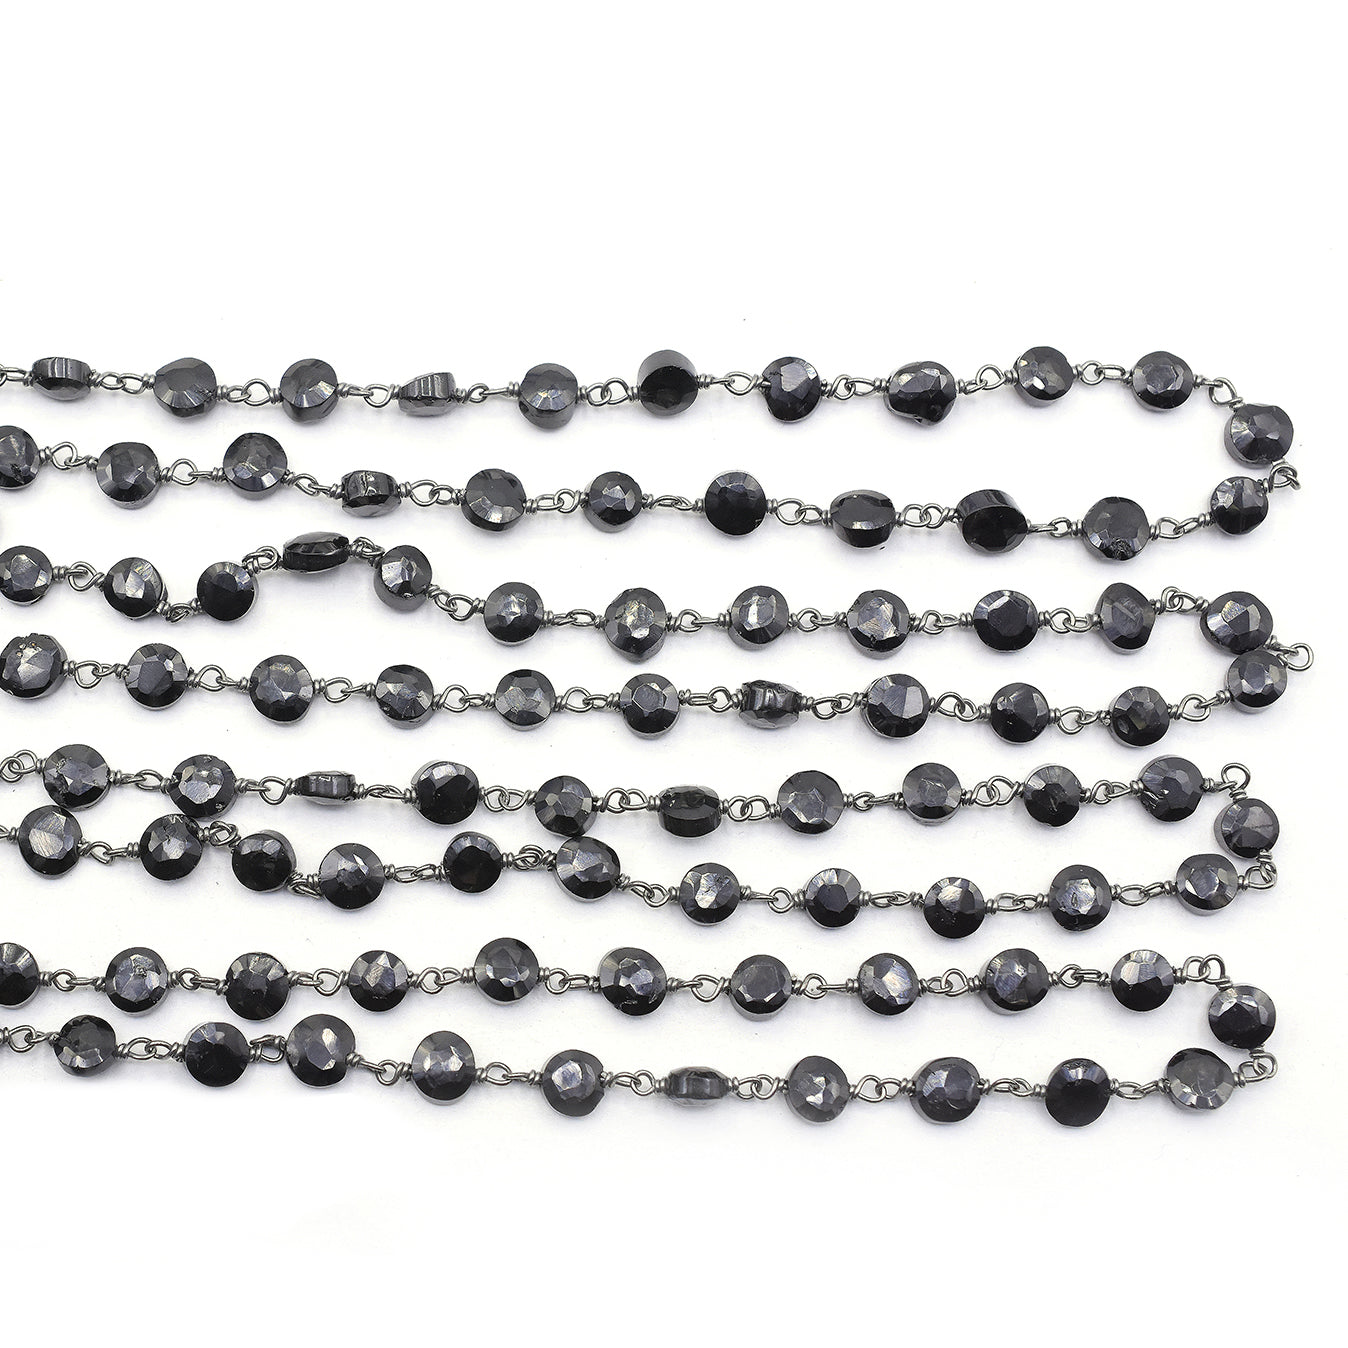 Black Onyx 6 To 7 MM Faceted Coin Sterling Silver Black Oxidized Rosary Wire Wrap Chain Sold by Foot - Jaipur Gem Factory